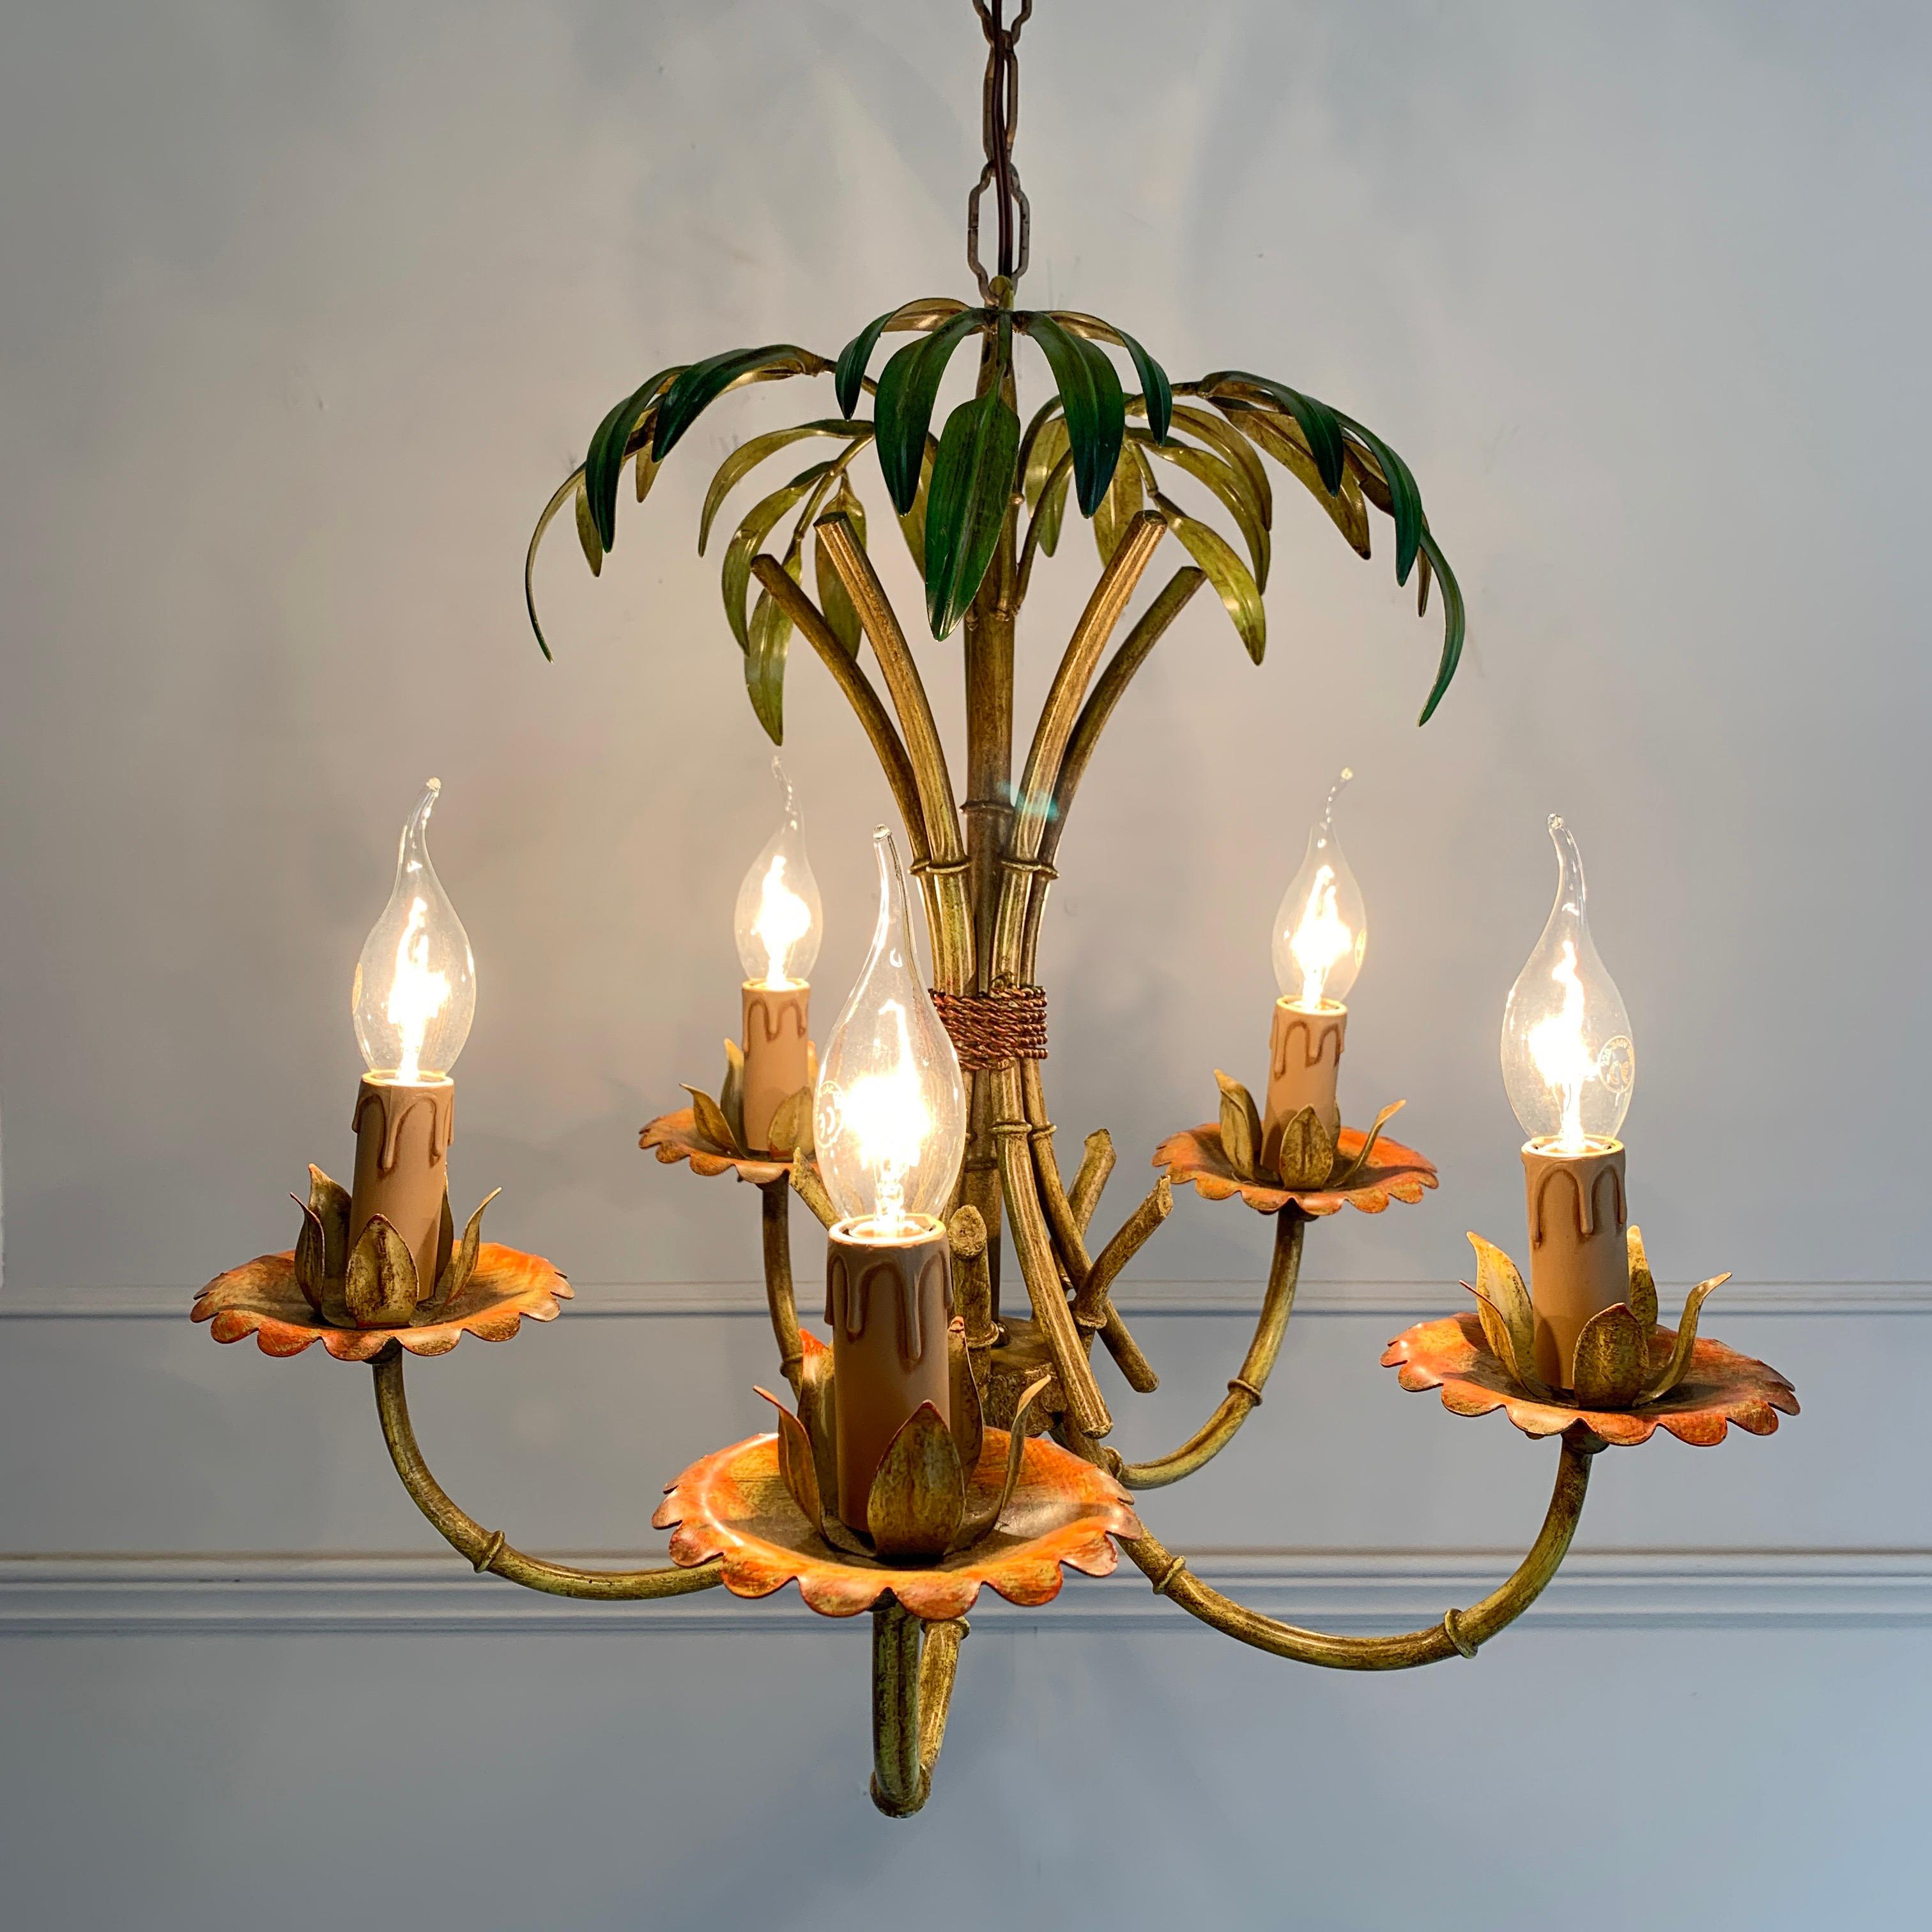 Faux bamboo palm chandelier, circa 1970s
Bright strong hand painted green and orange tones across this faux bamboo palm light
The chandelier has 5 lamp holders
A small matching rose sits at the top of the chain
Measures: 99cm total drop, 42cm light